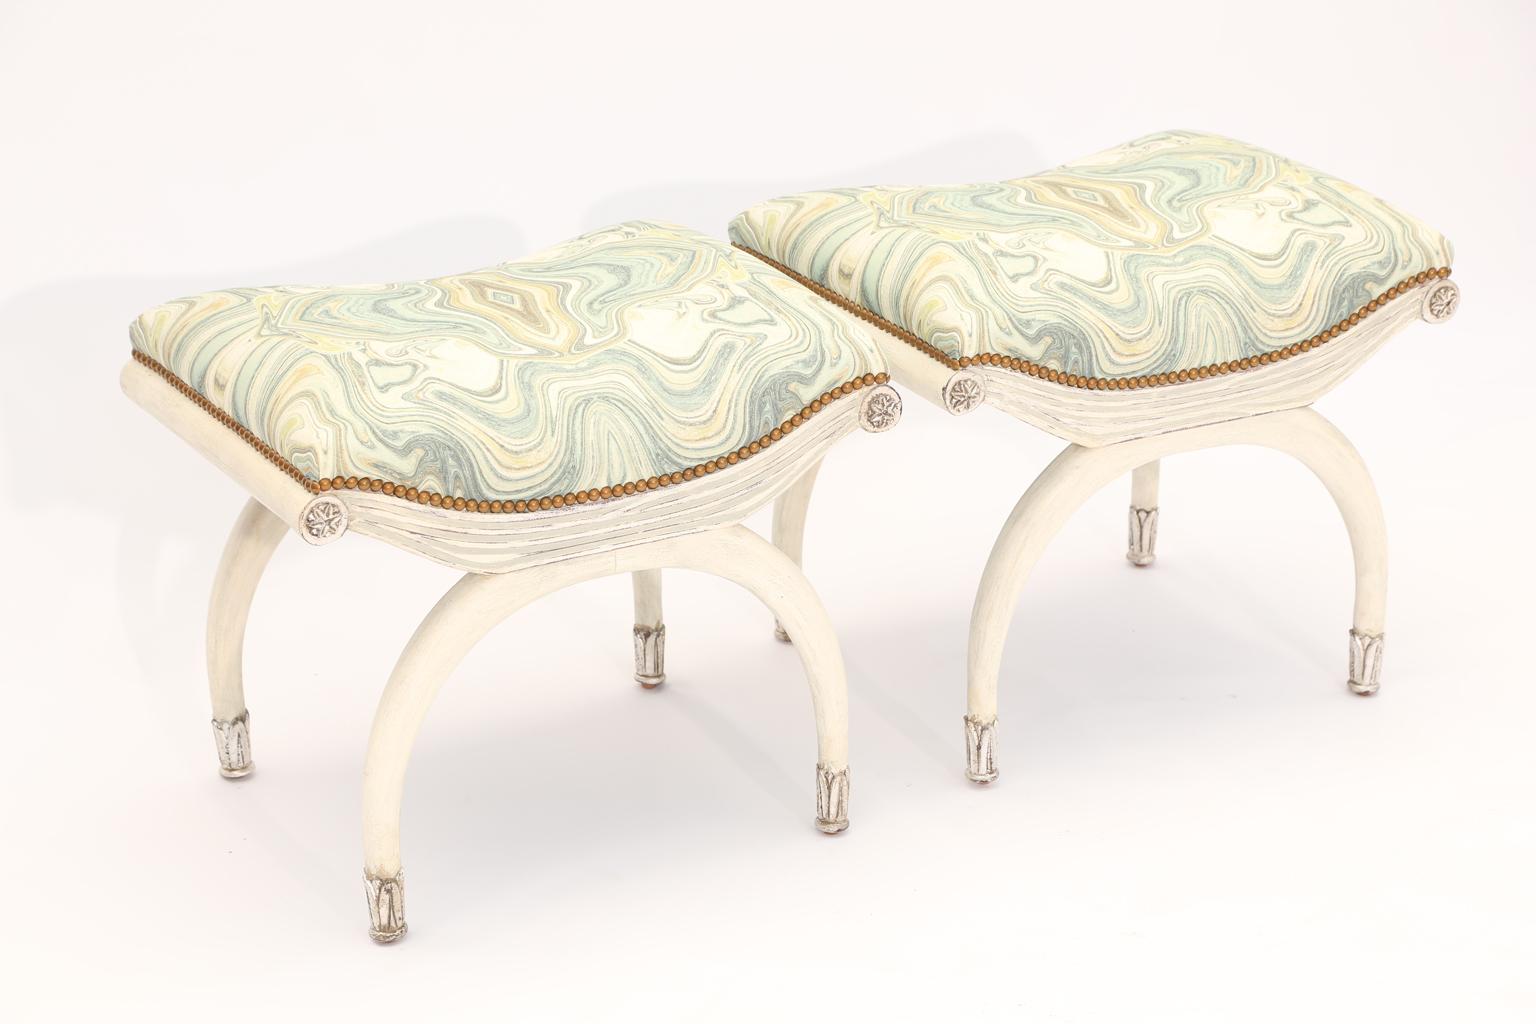 Pair of benches, each having a padded, rectangular seat, upholstered with nailheads, on painted frame with parcel silver gilt accents, the finish showing natural wear, its apron carved to resemble draped fabric, flanked by rosettes, raised on curved